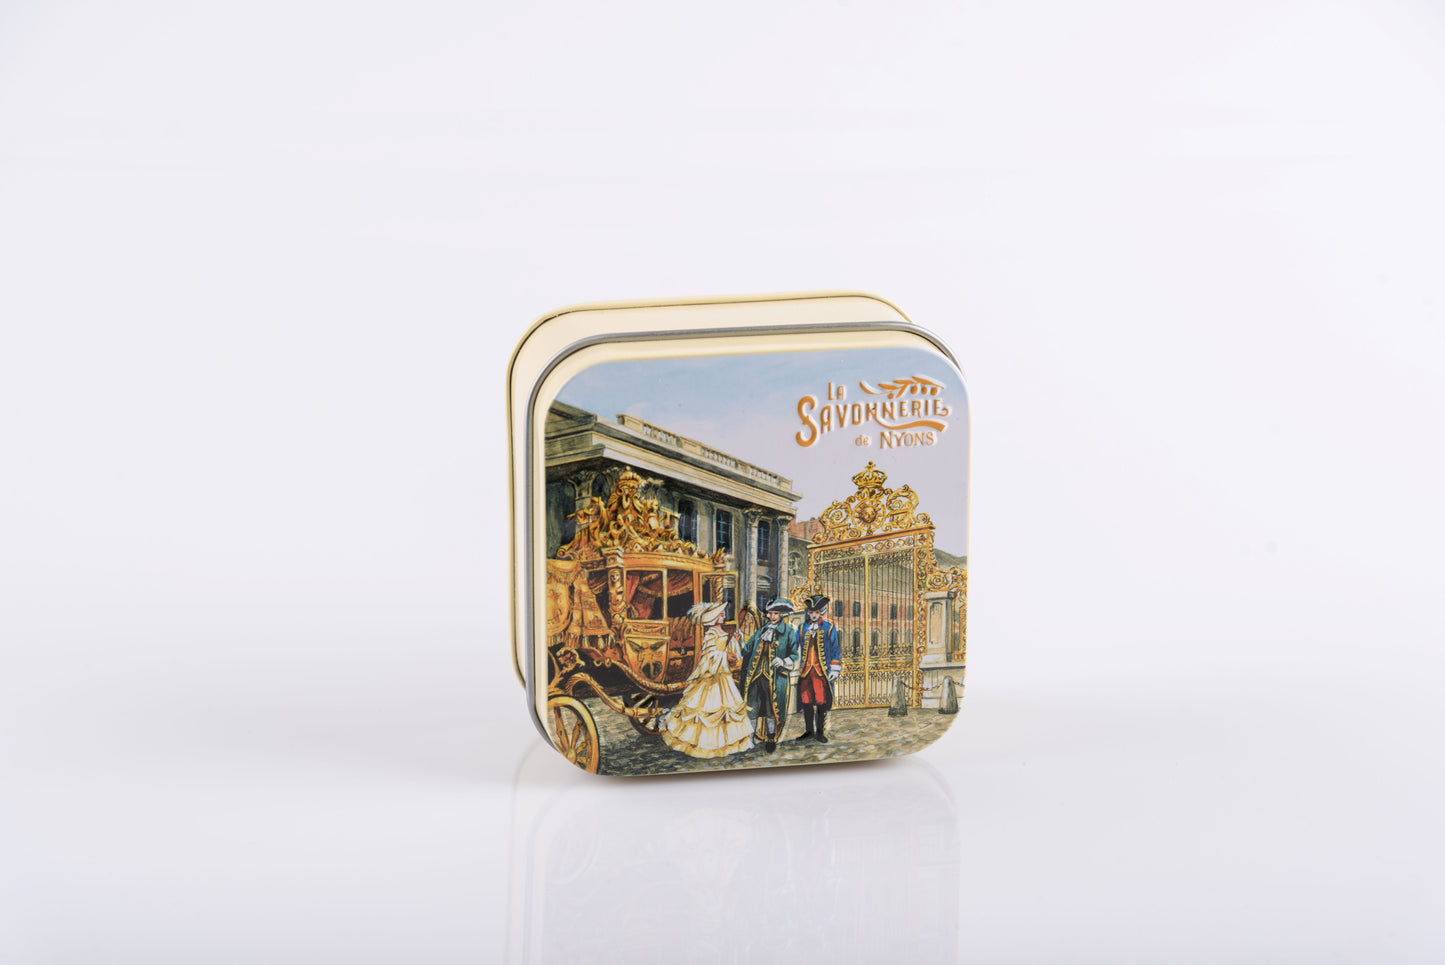 May rose Soap in "Carriage" Tin Box 3.5 oz